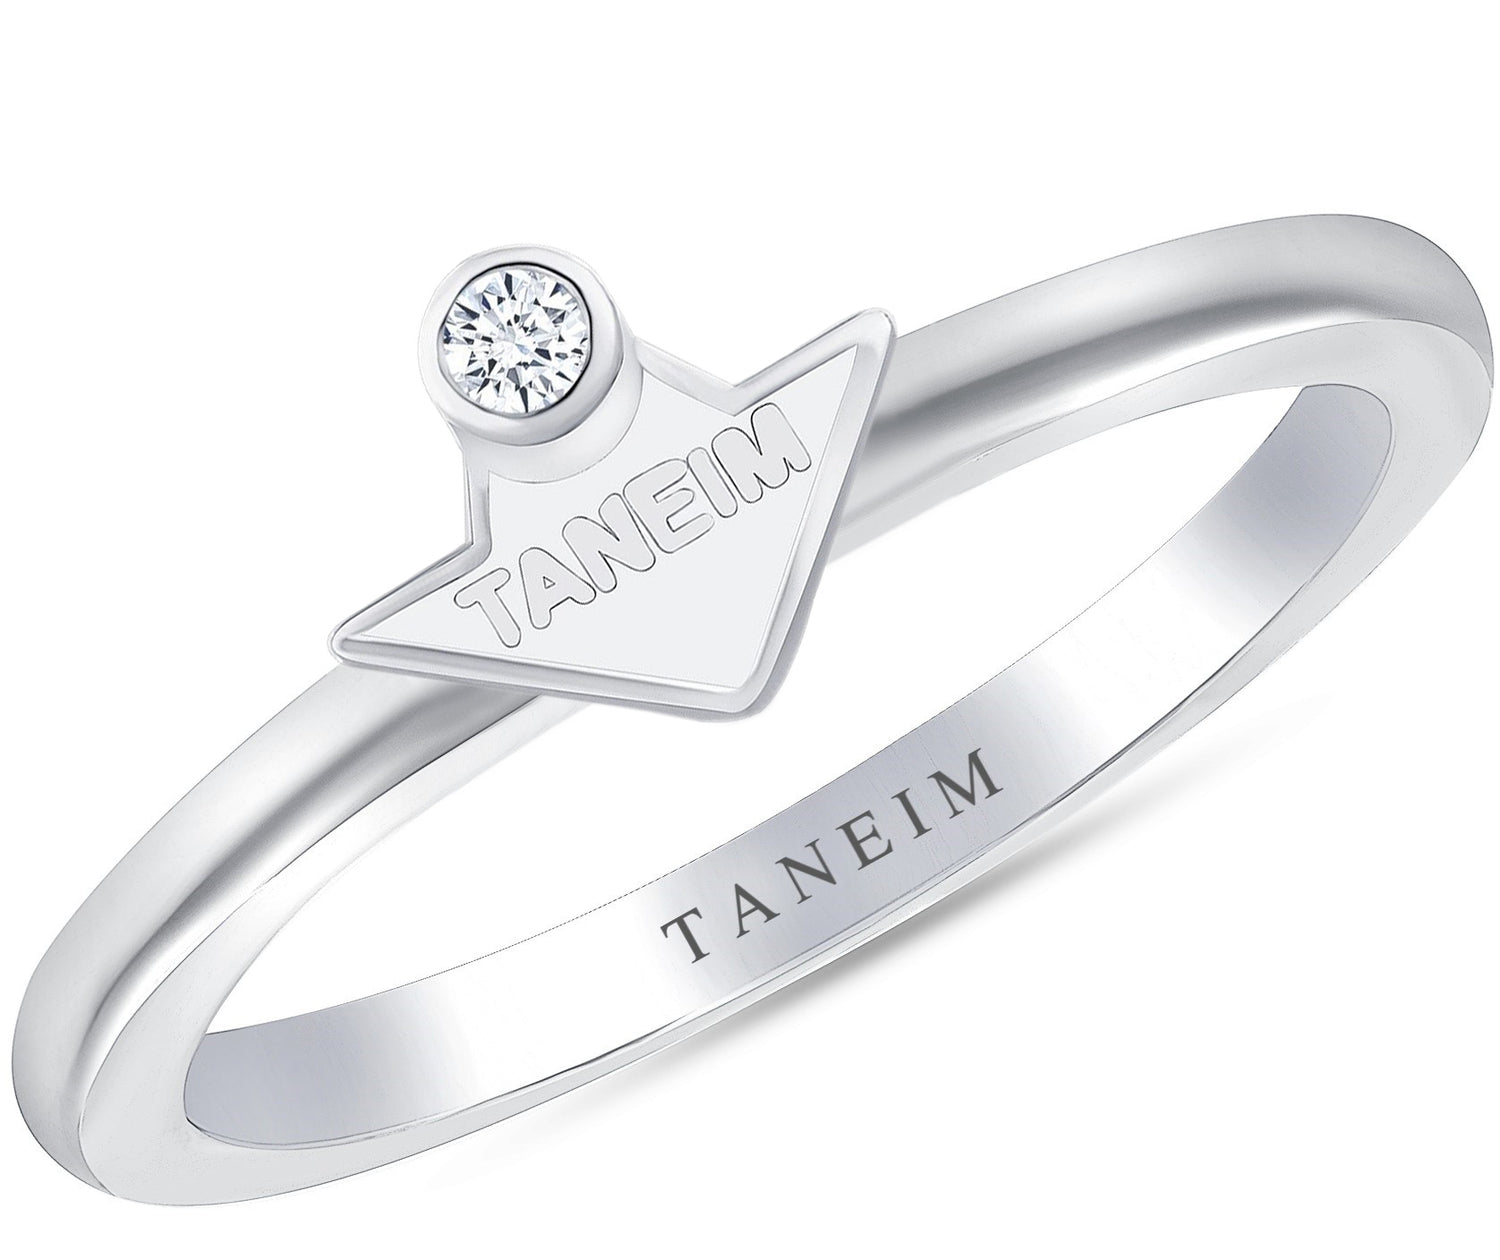 TANEIM STAR 14K SOLID GOLD (OR) 925 SILVER RING